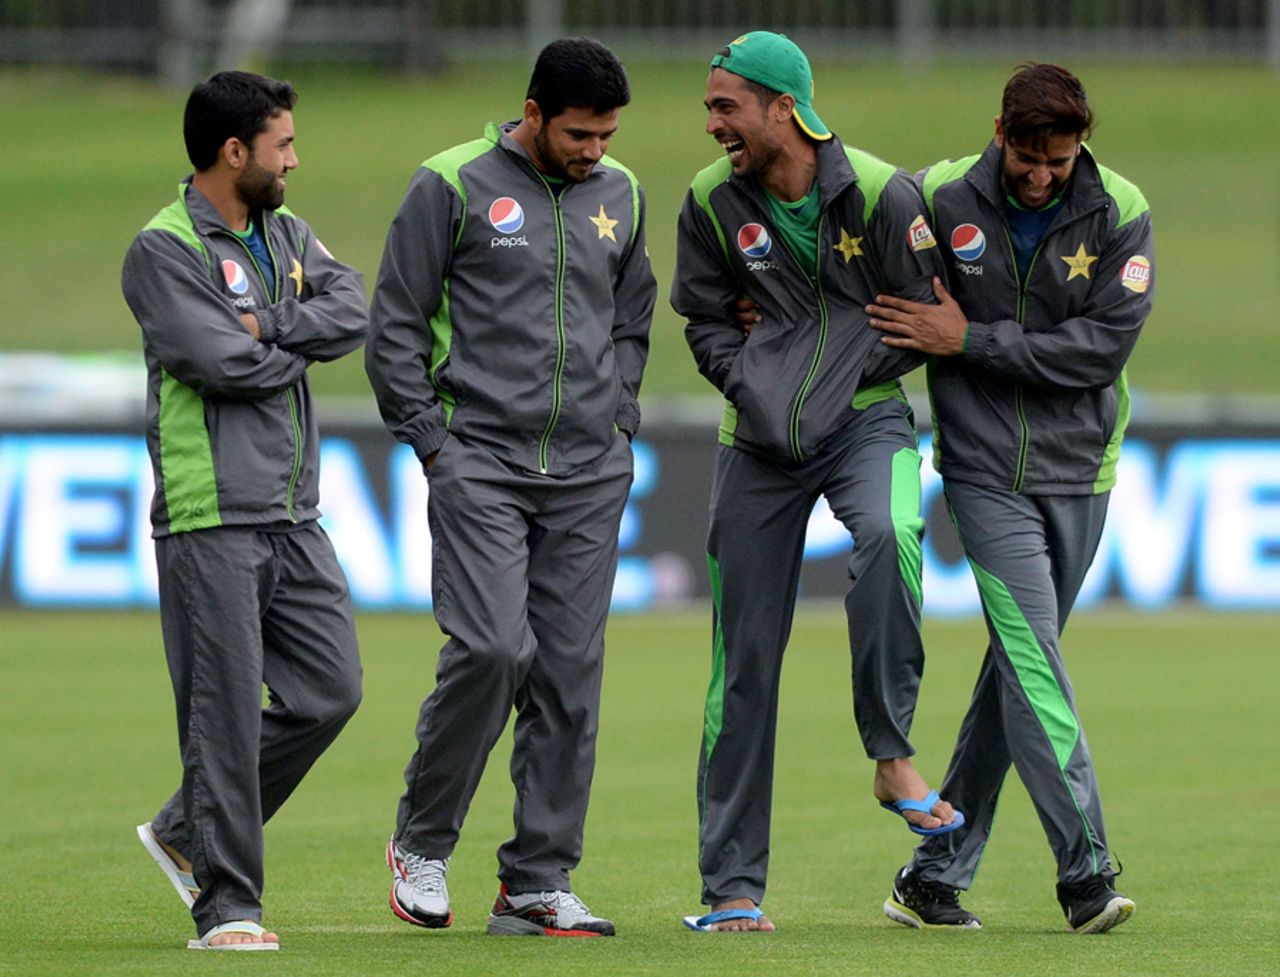 Mohammad Amir has a laugh with his team-mates, New Zealand v Pakistan, 2nd ODI, Napier, January 28, 2016